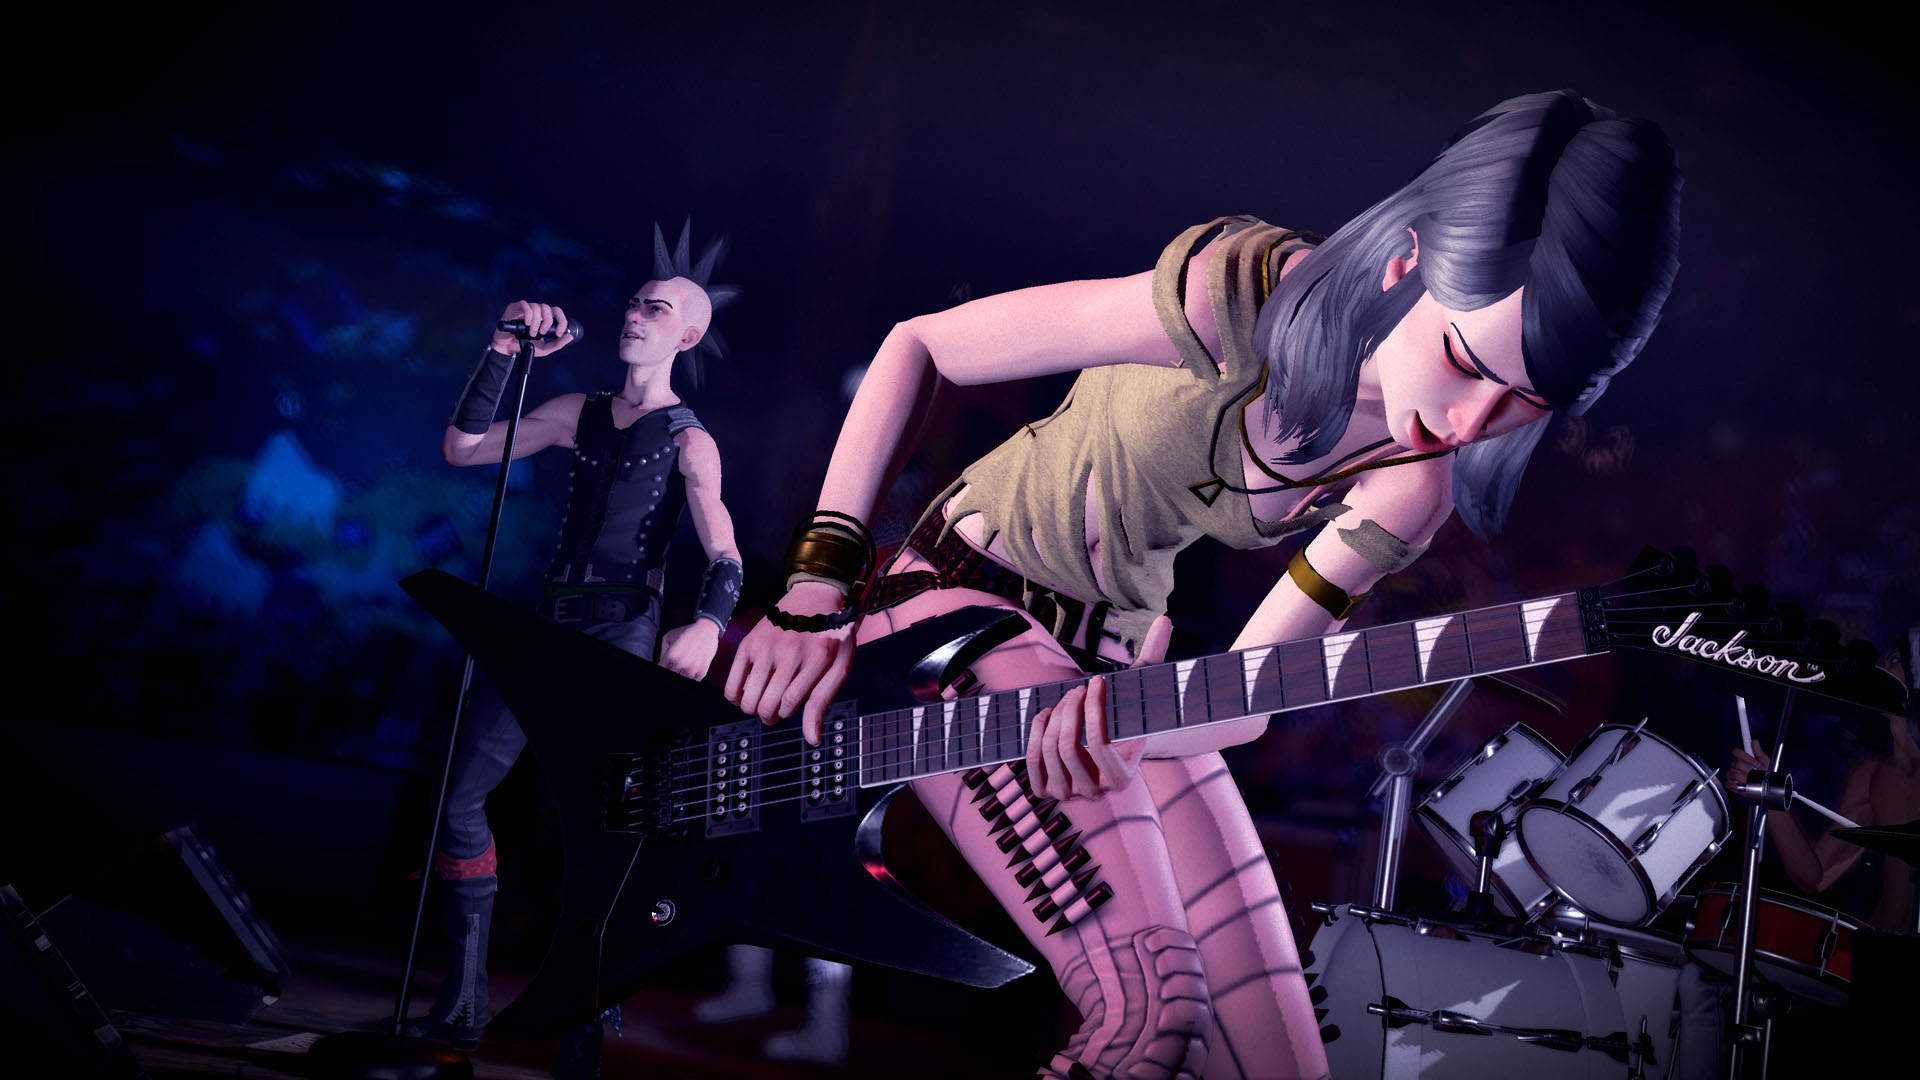 rock band rivals download free